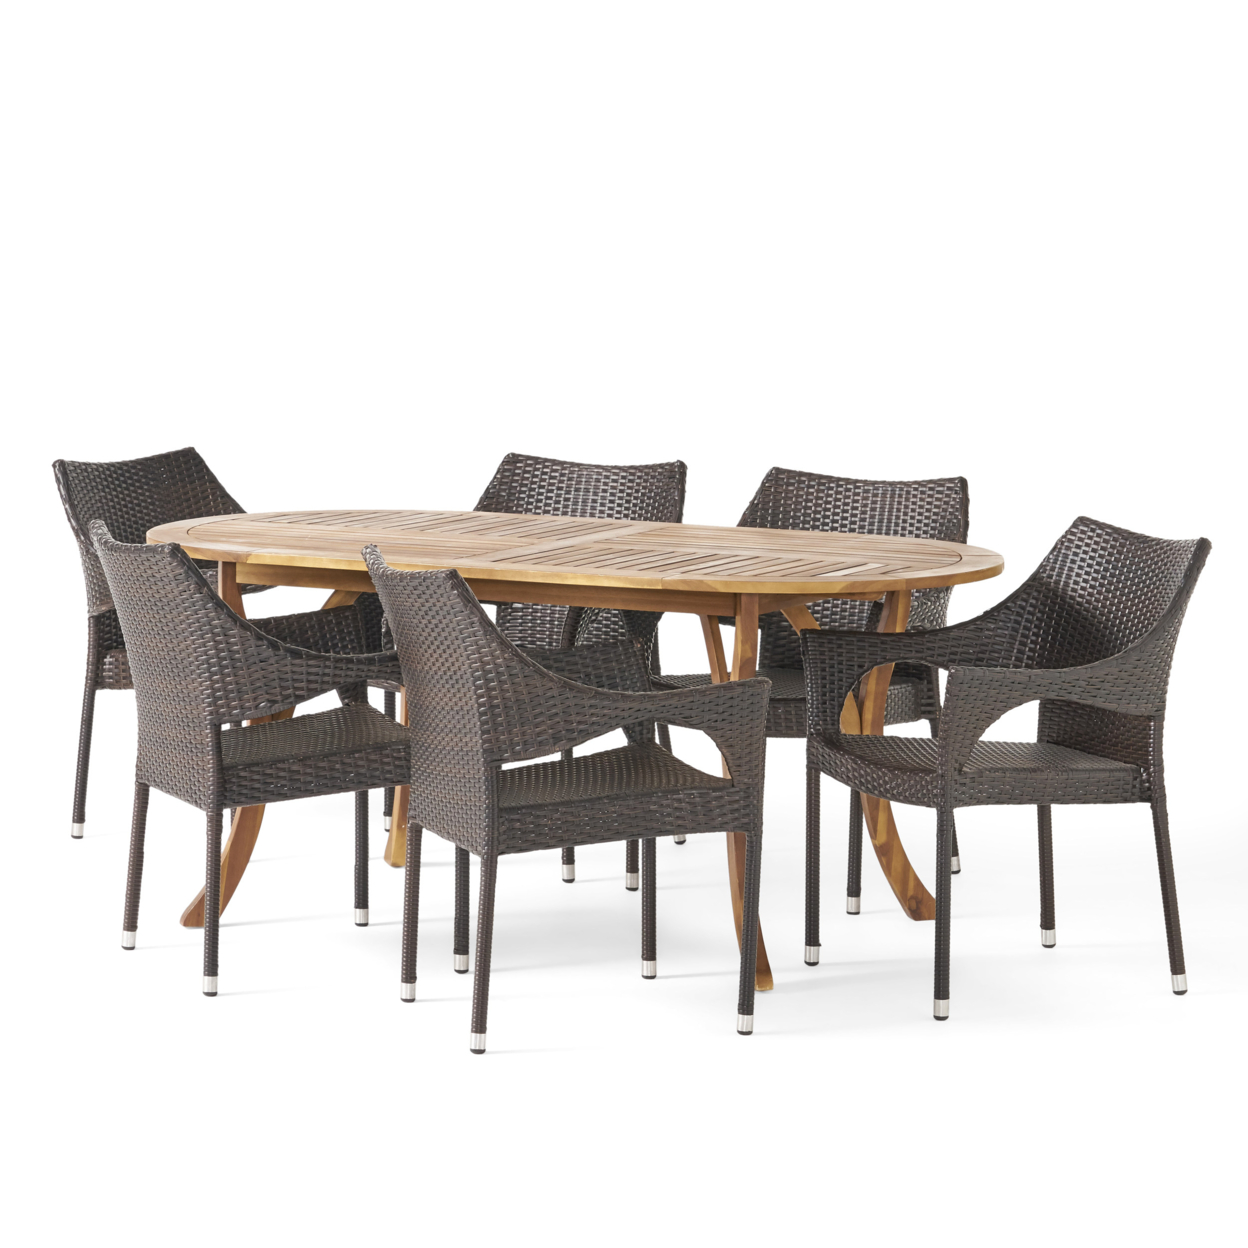 Reeder Outdoor 7 Piece Acacia Wood And Wicker Dining Set, Teak With Multi Brown Chairs